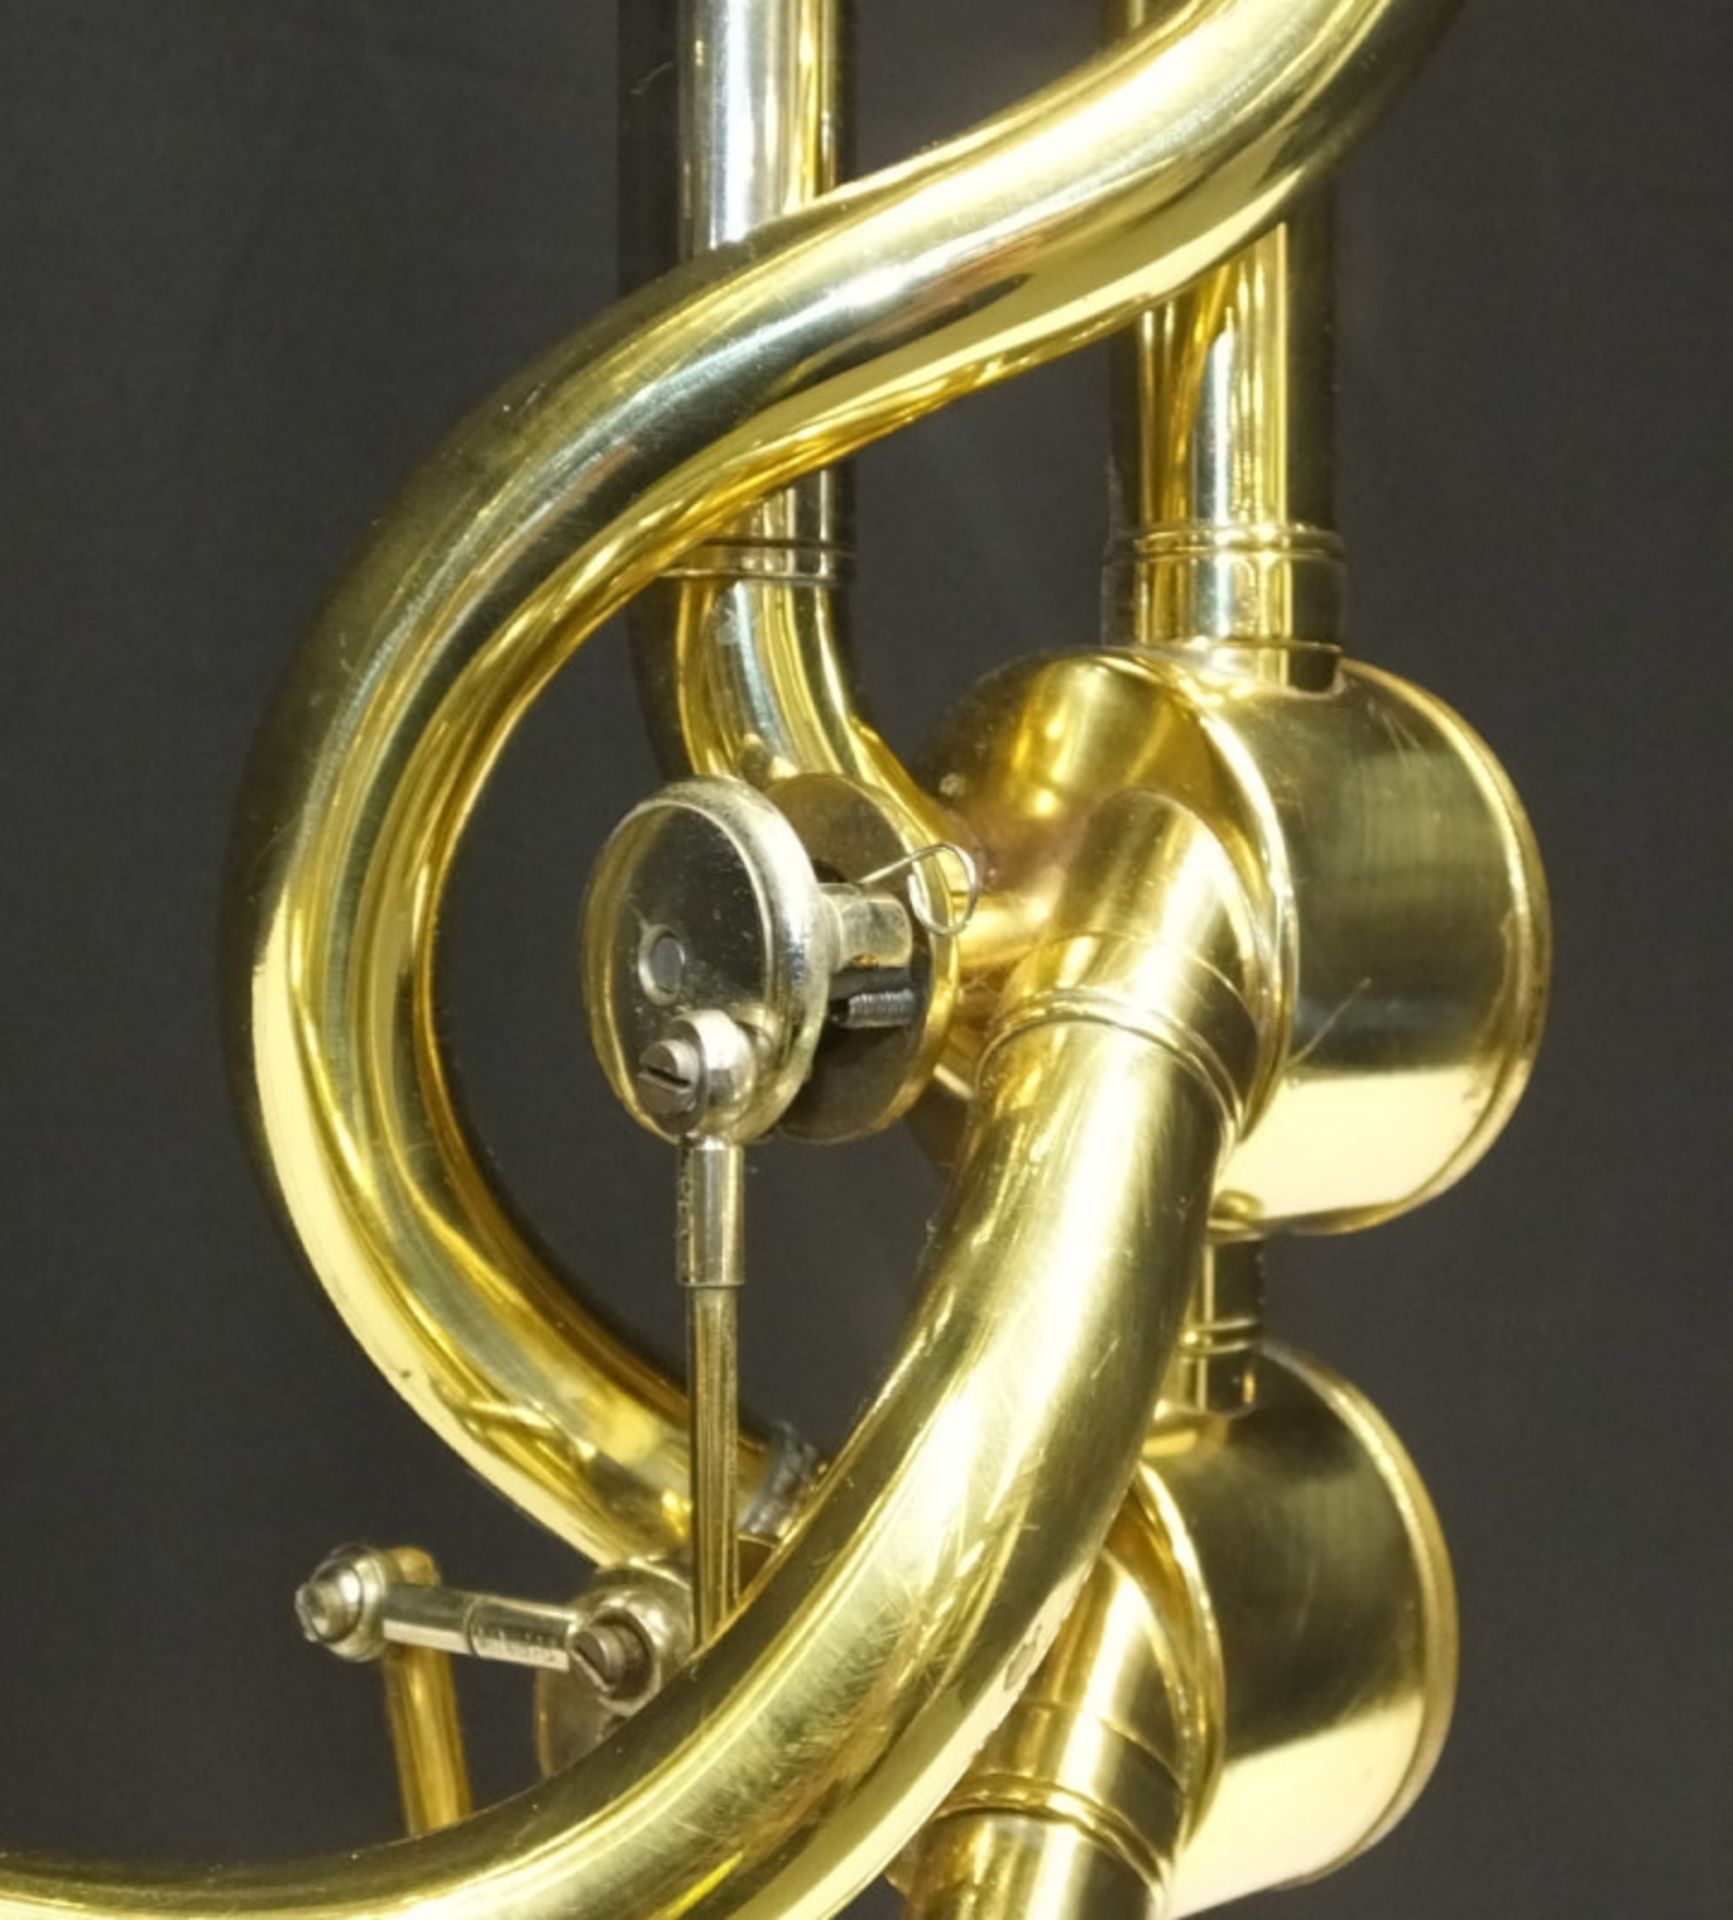 Rath R9 Trombone in Protec case - Serial No. R9 012 - Please check photos carefully for - Image 14 of 22